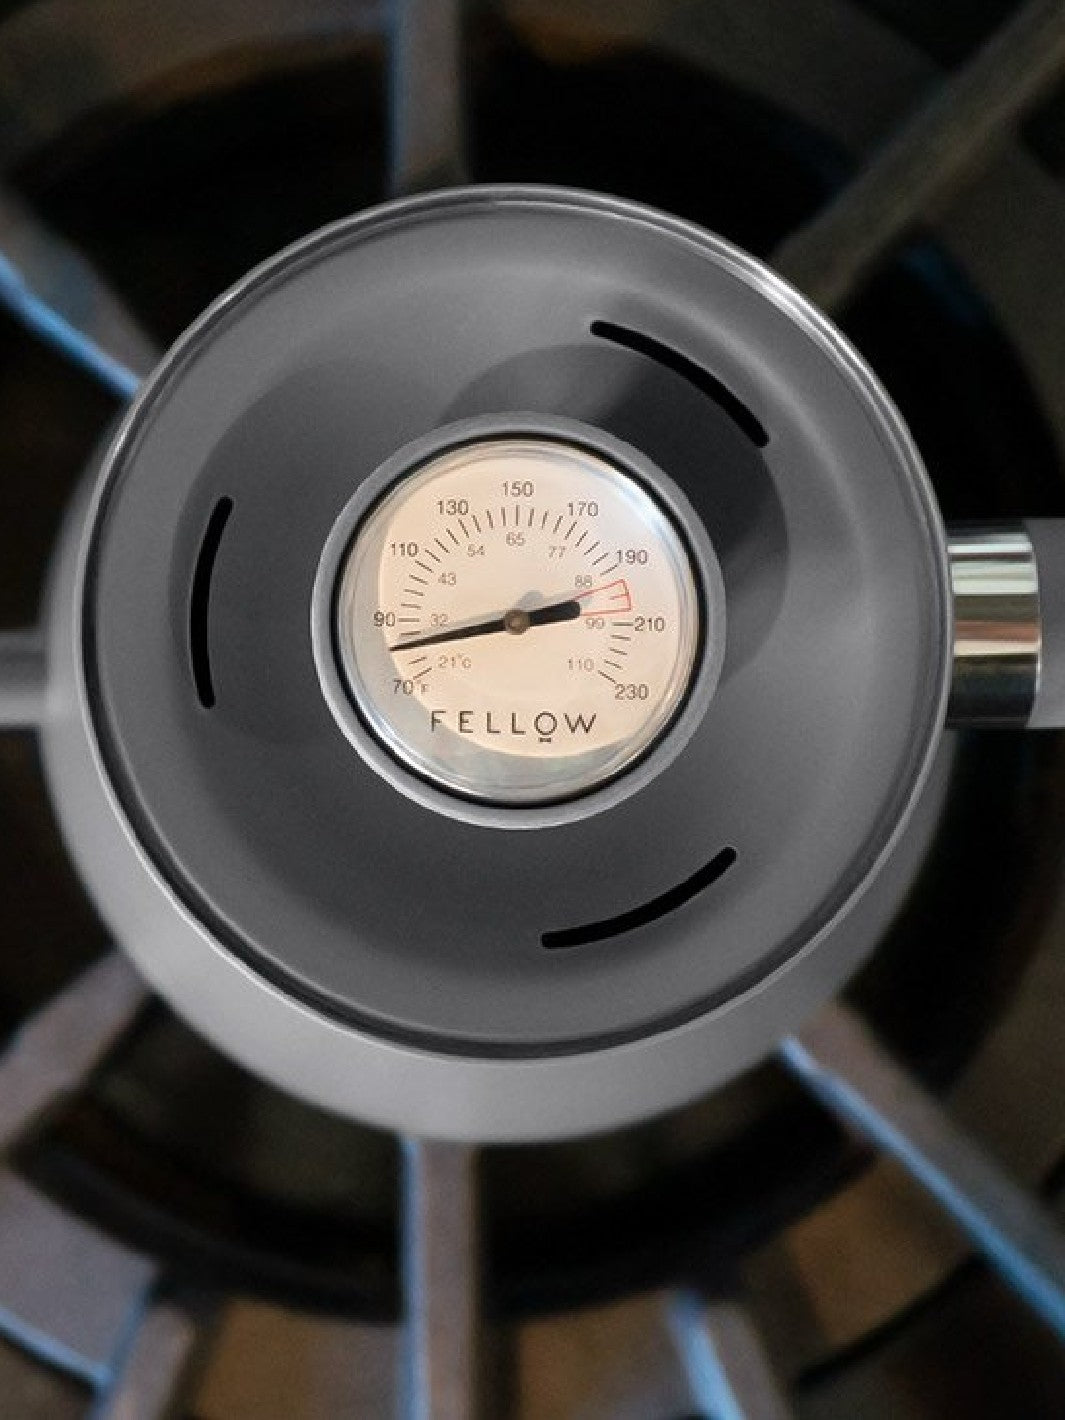 FELLOW Stagg Brew Range Thermometer